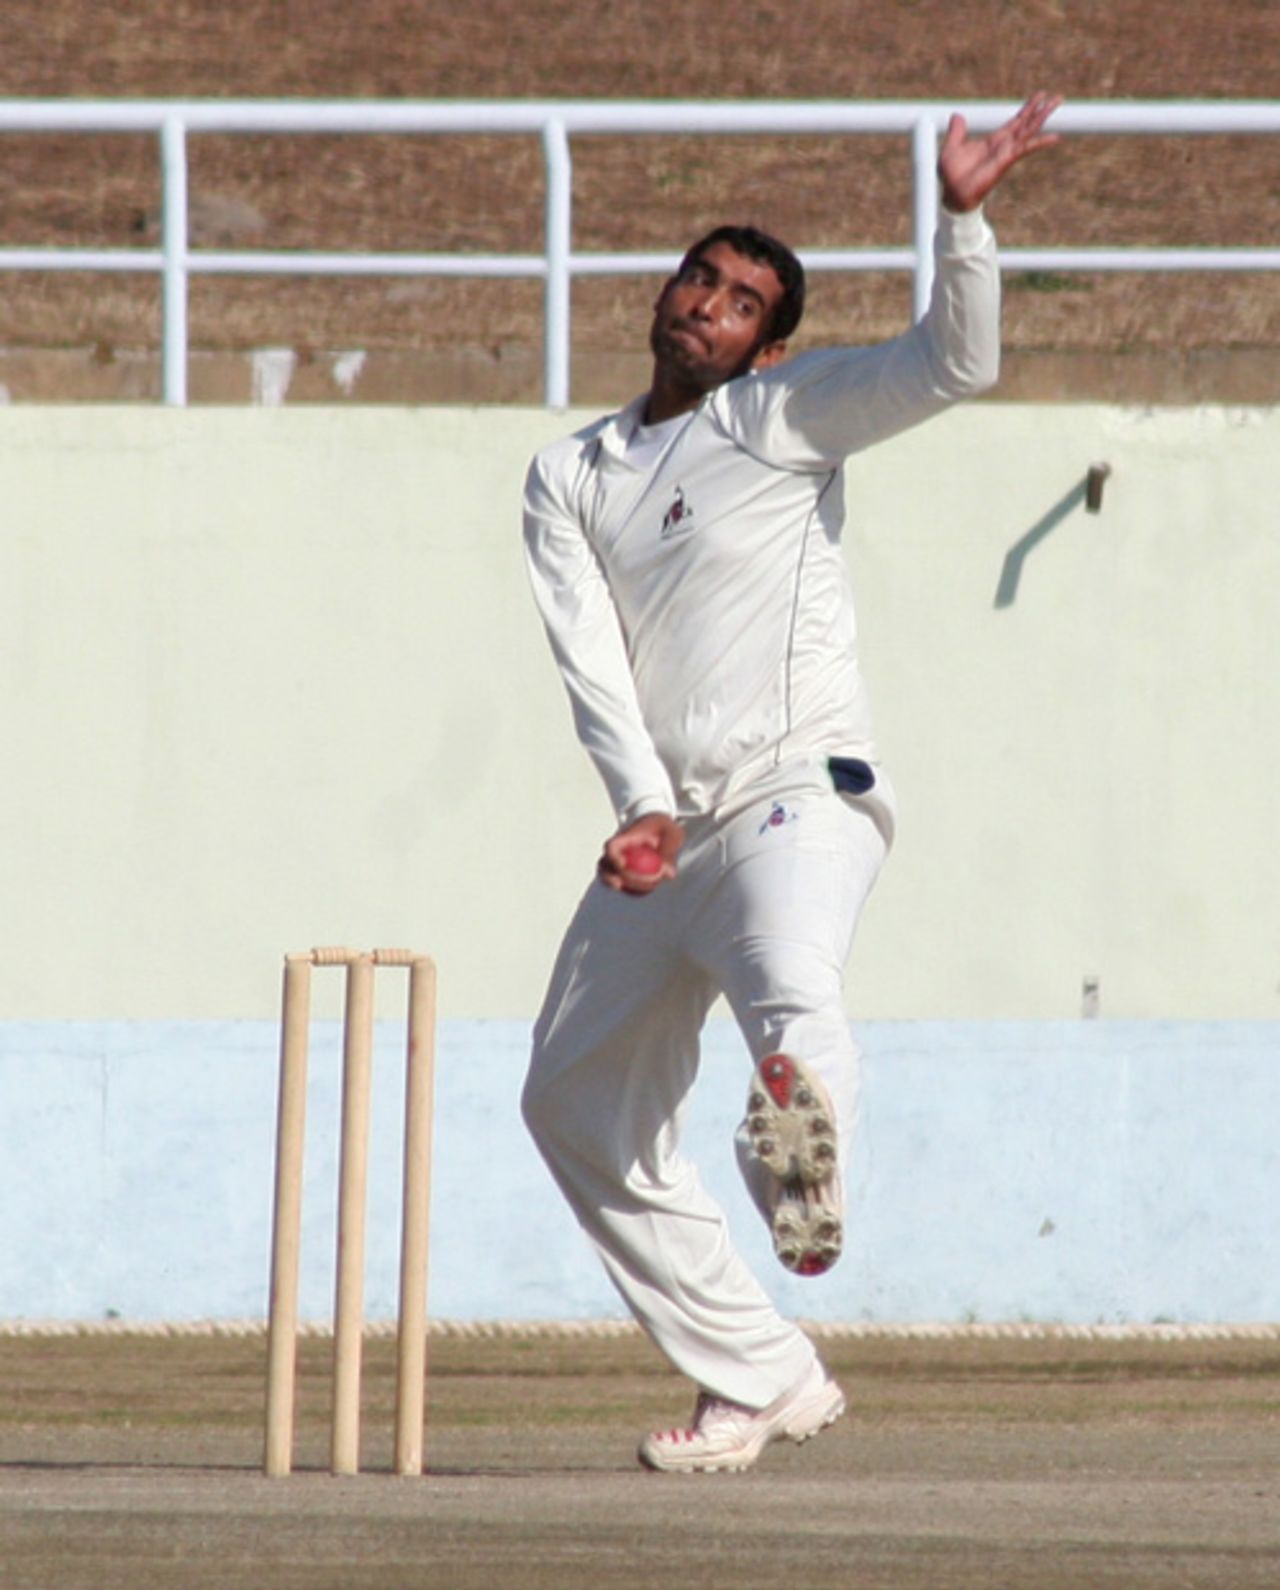 Sumit Mathur in his delivery stride, Himachal Pradesh v Rajashtan, Ranji Tropy Super League, Group A, 7th round, 1st day, Dharamsala, December 25, 2007 